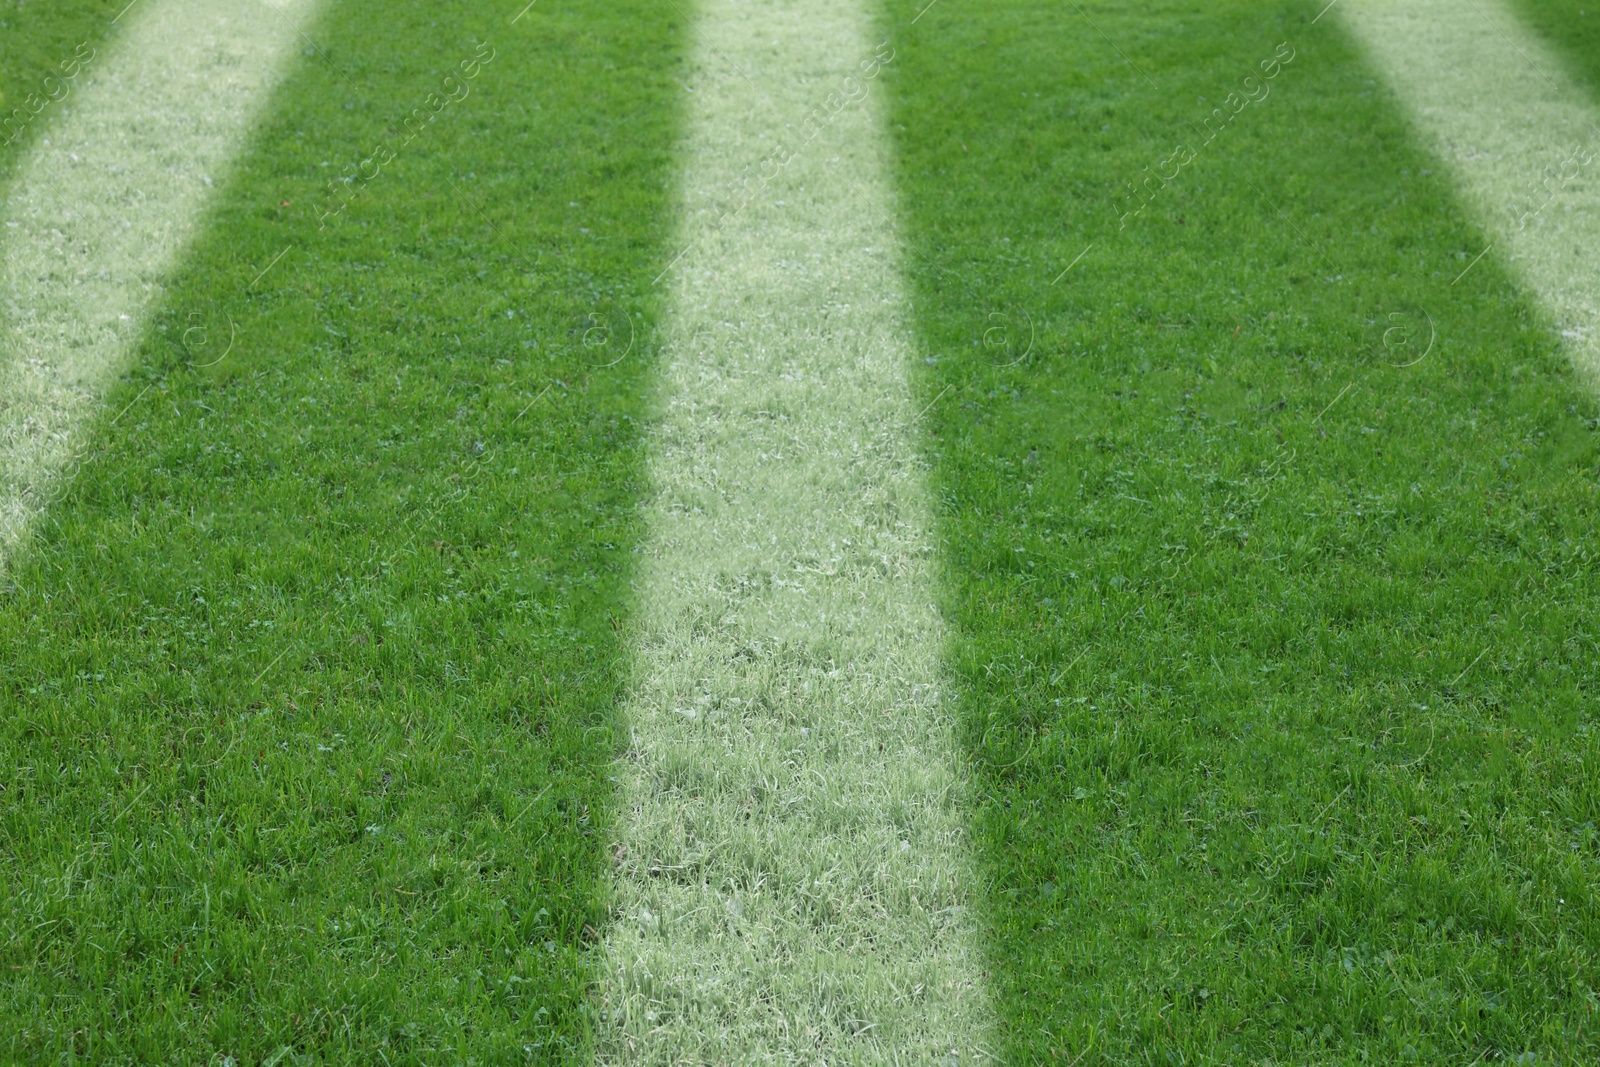 Image of Green grass with white markings, closeup view